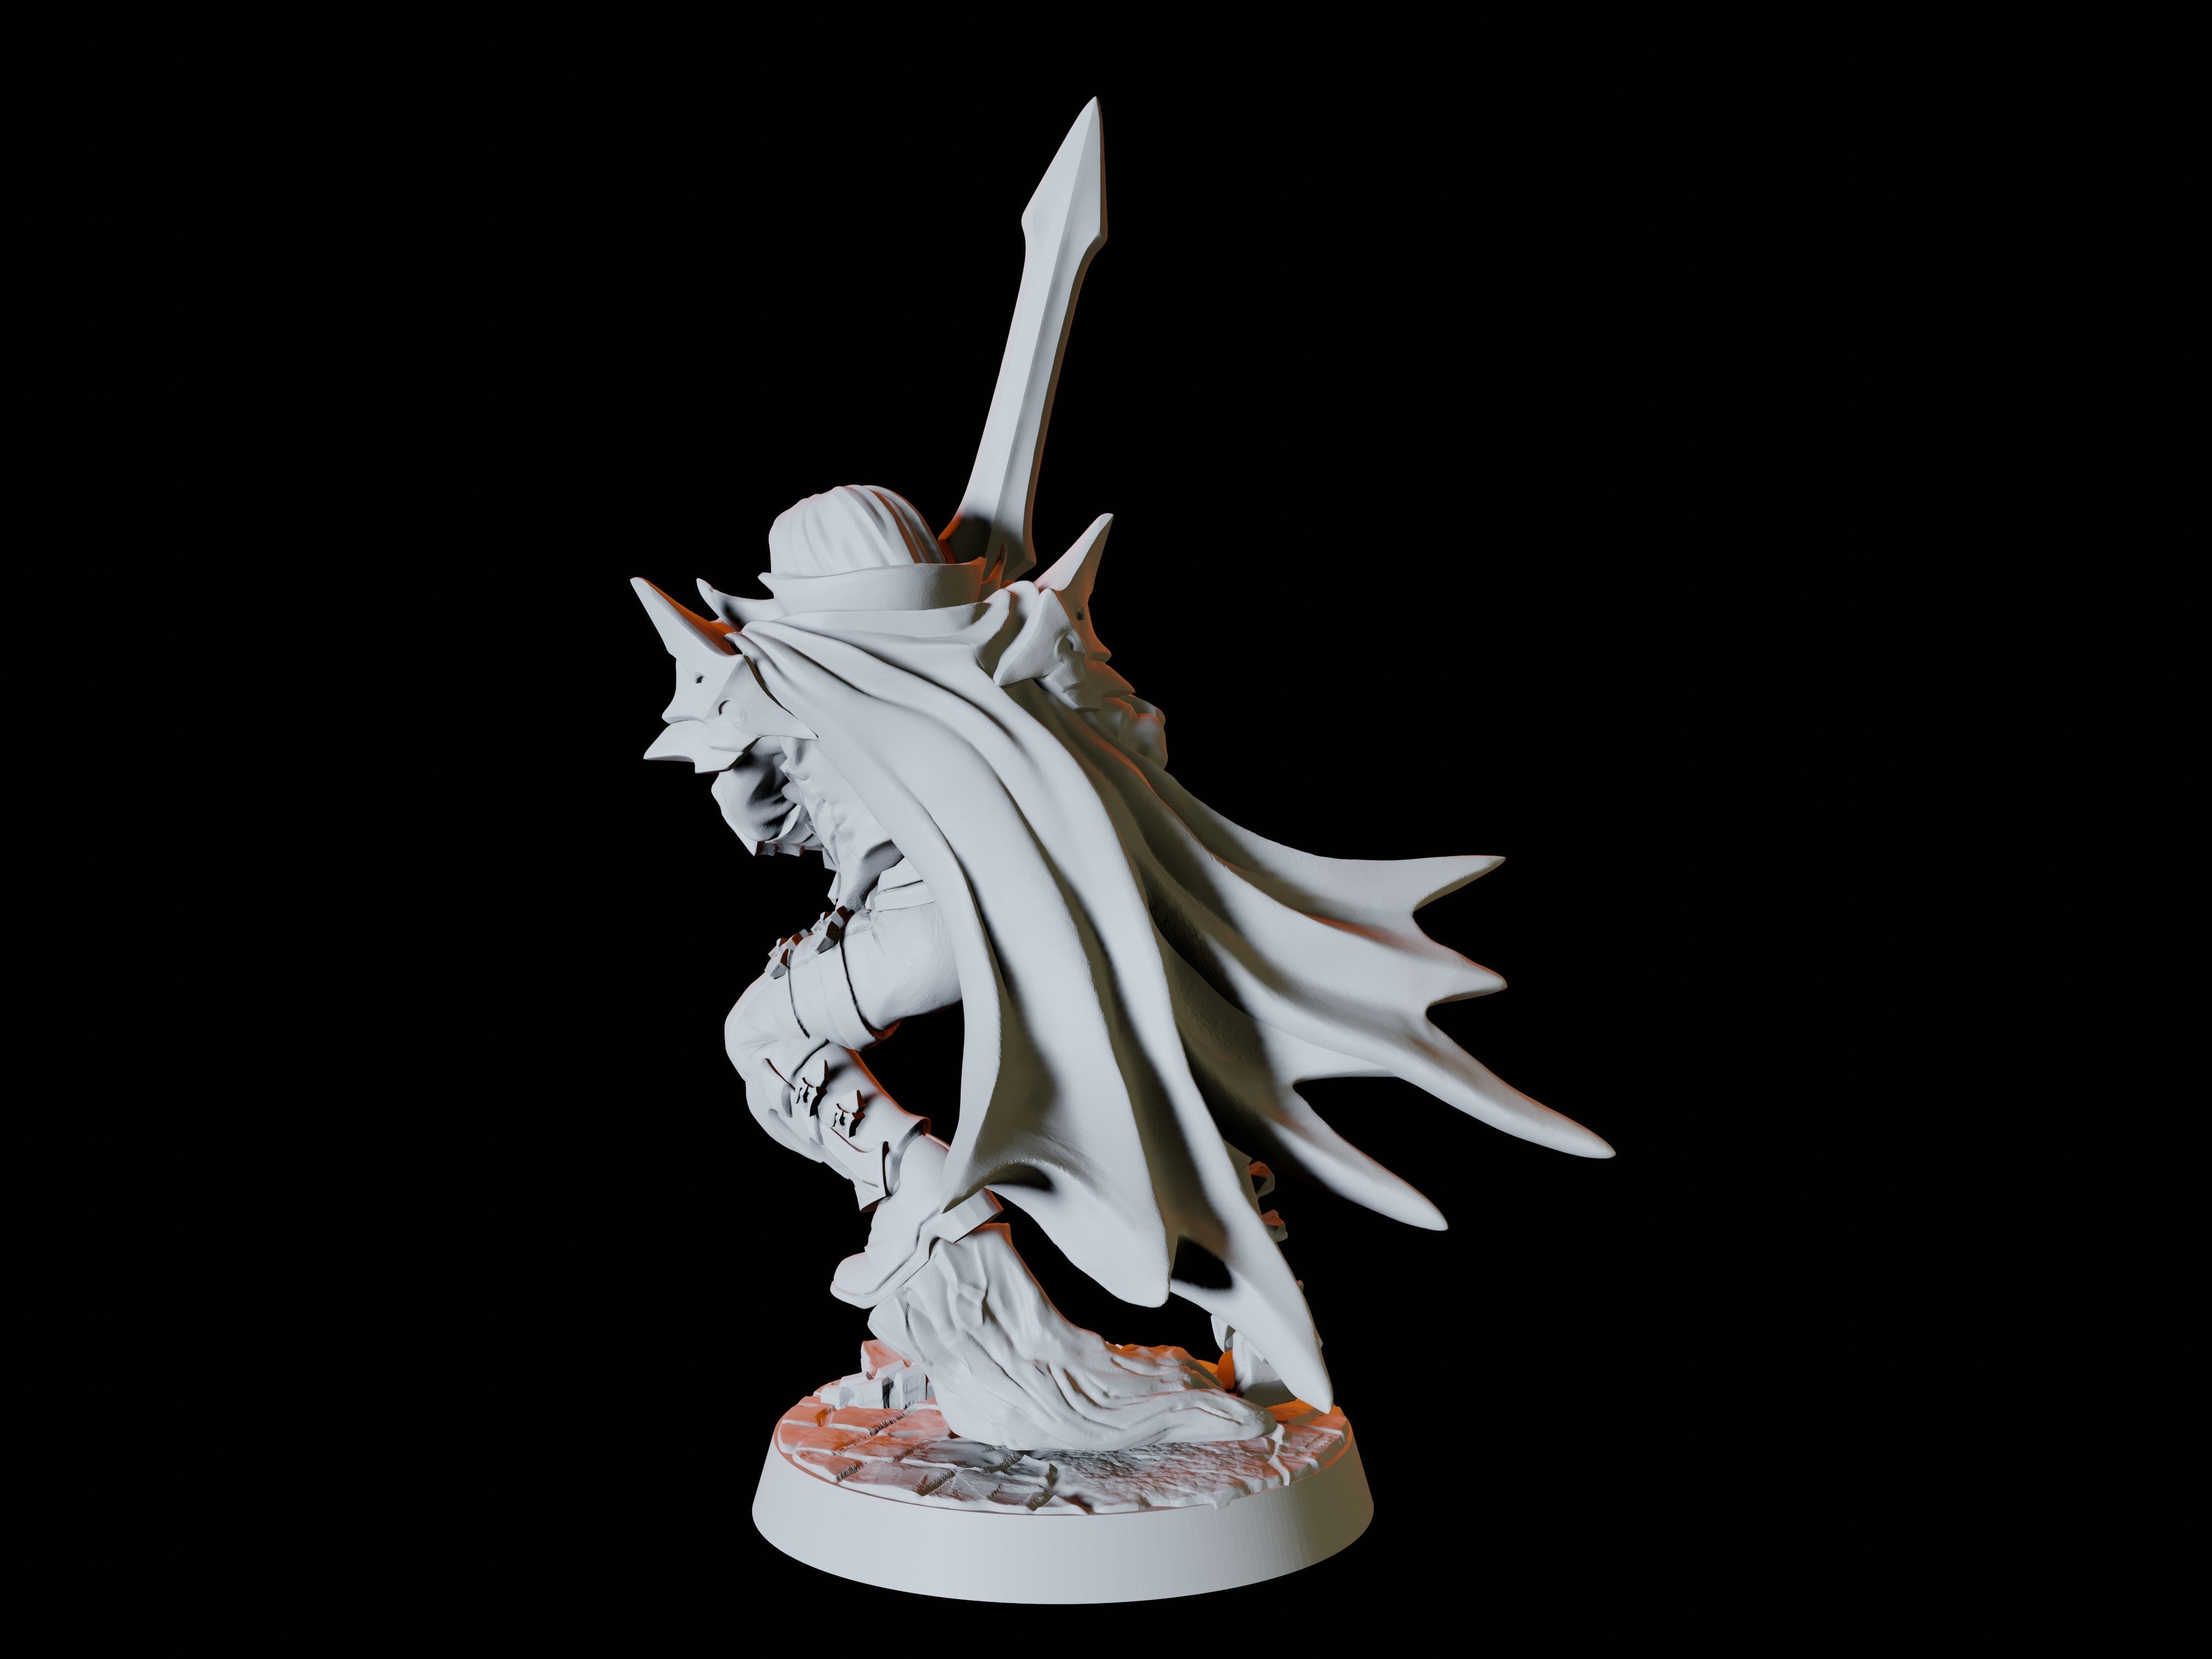 Six Vampire Miniatures for Dungeons and Dragons - Myth Forged